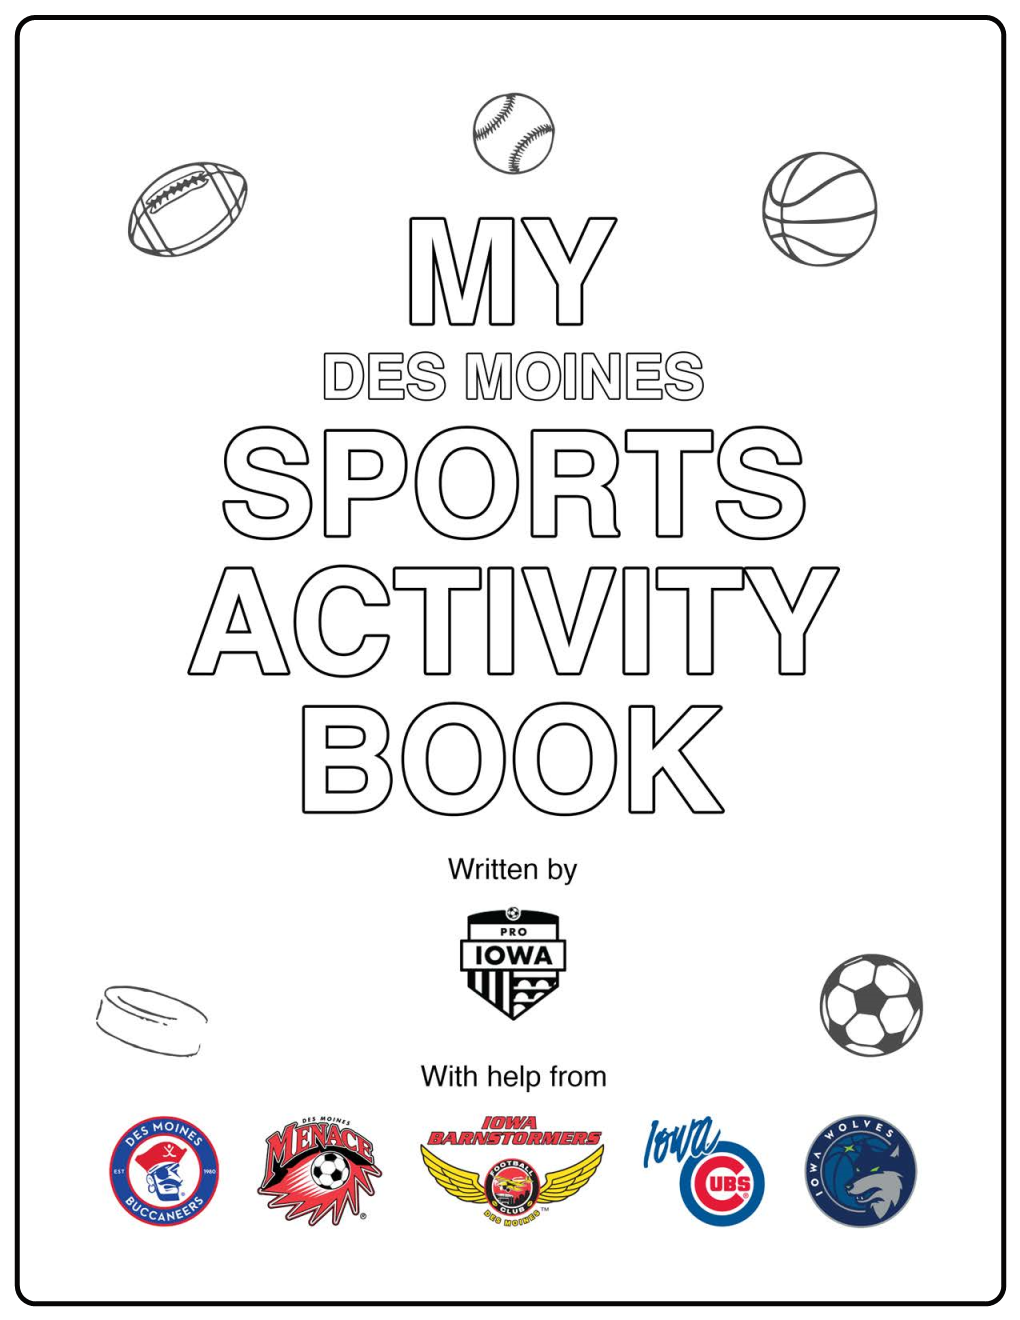 My Des Moines Sports Activity Book